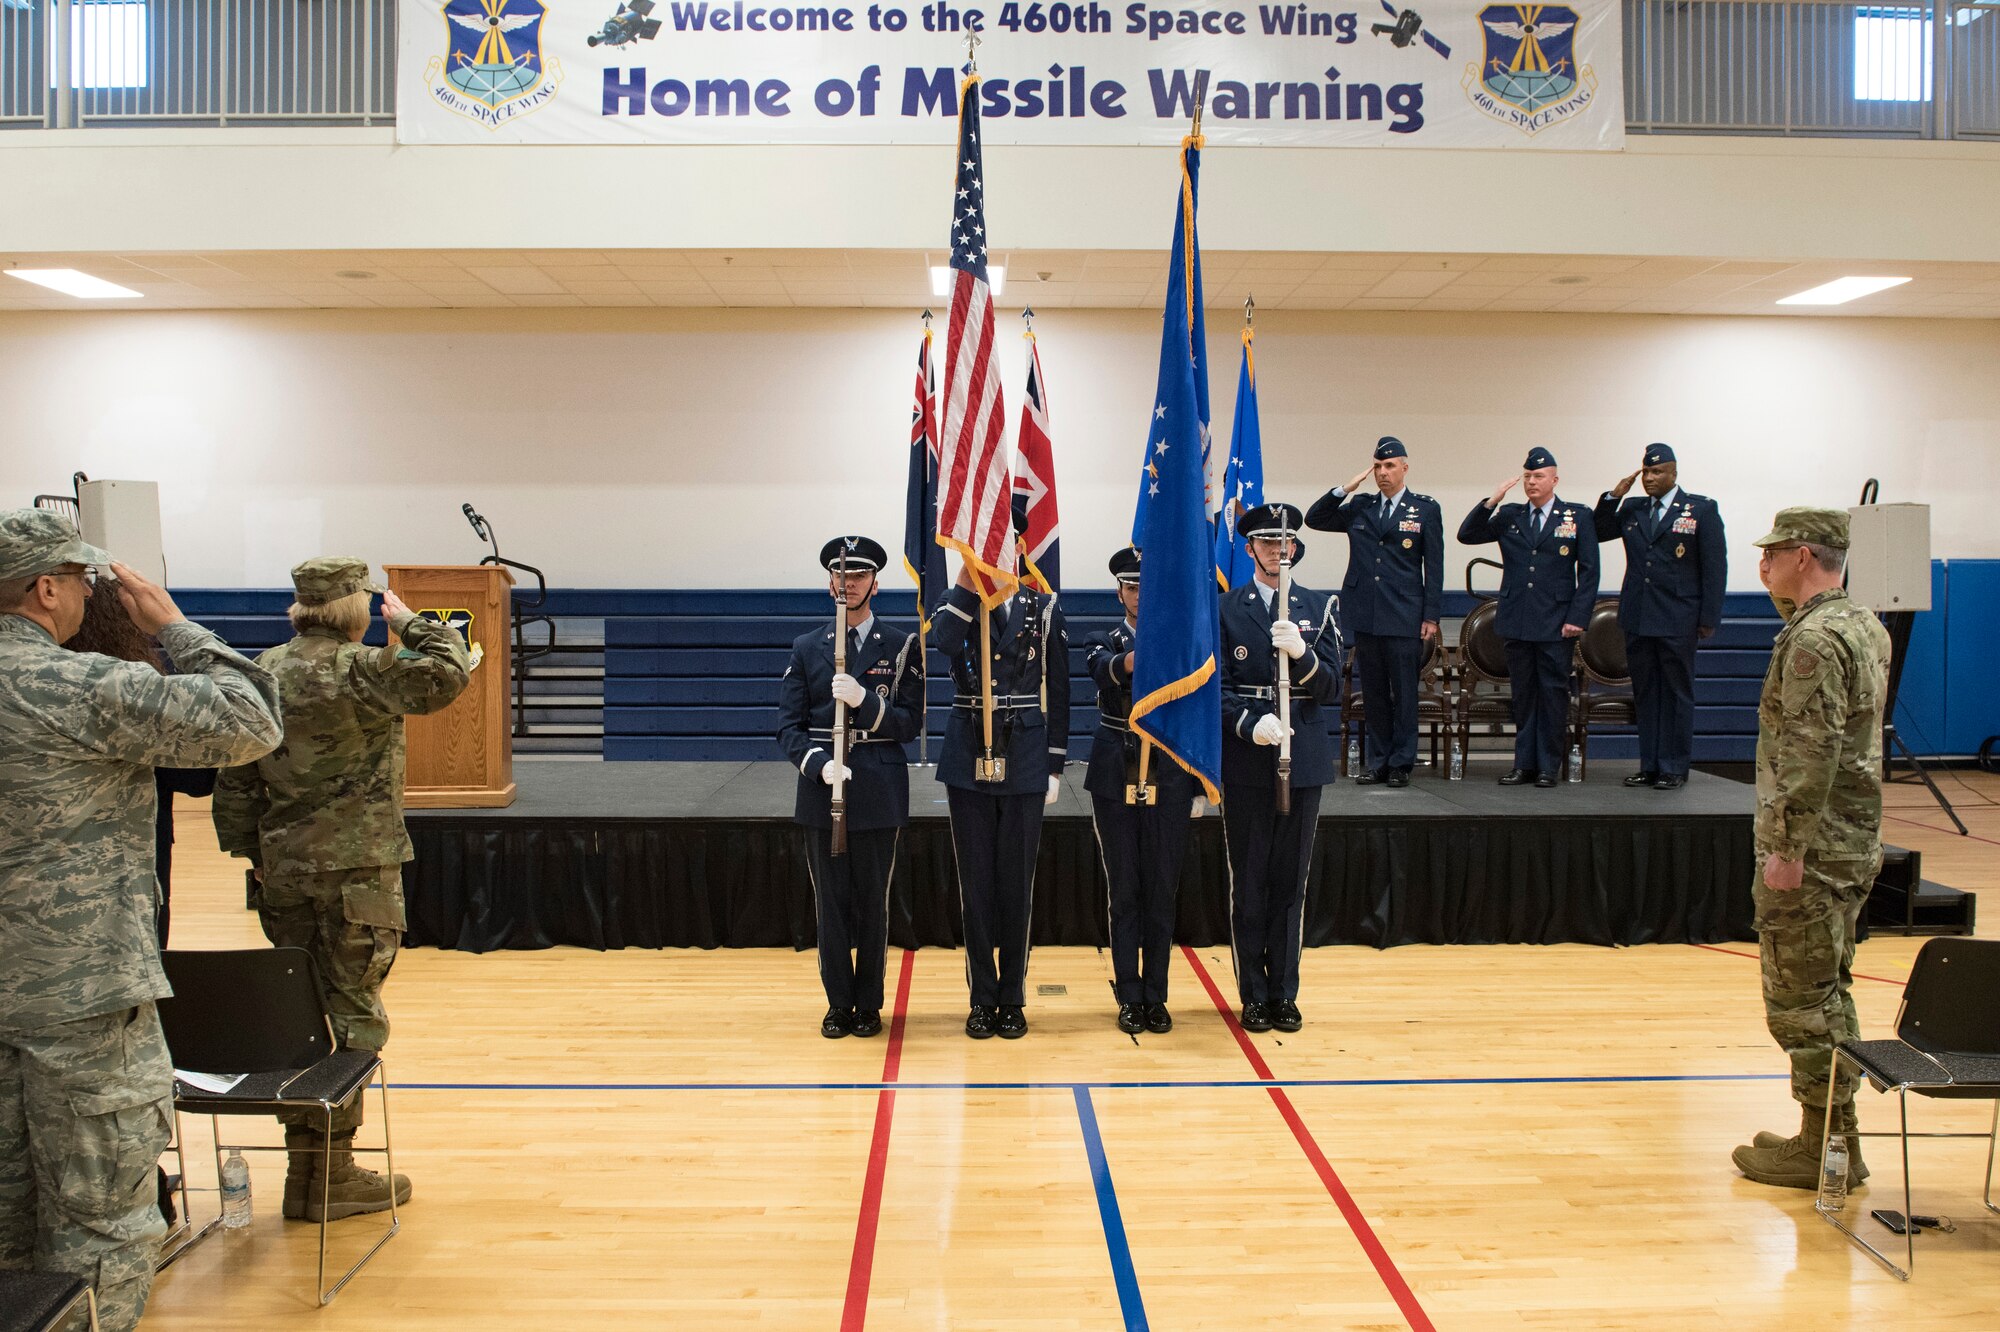 Mile-High Honor Guardsmen present the colors during the playing of the national anthem at the 460th Space Wing change of command ceremony May 3, 2019, on Buckley Air Force Base, Colorado.